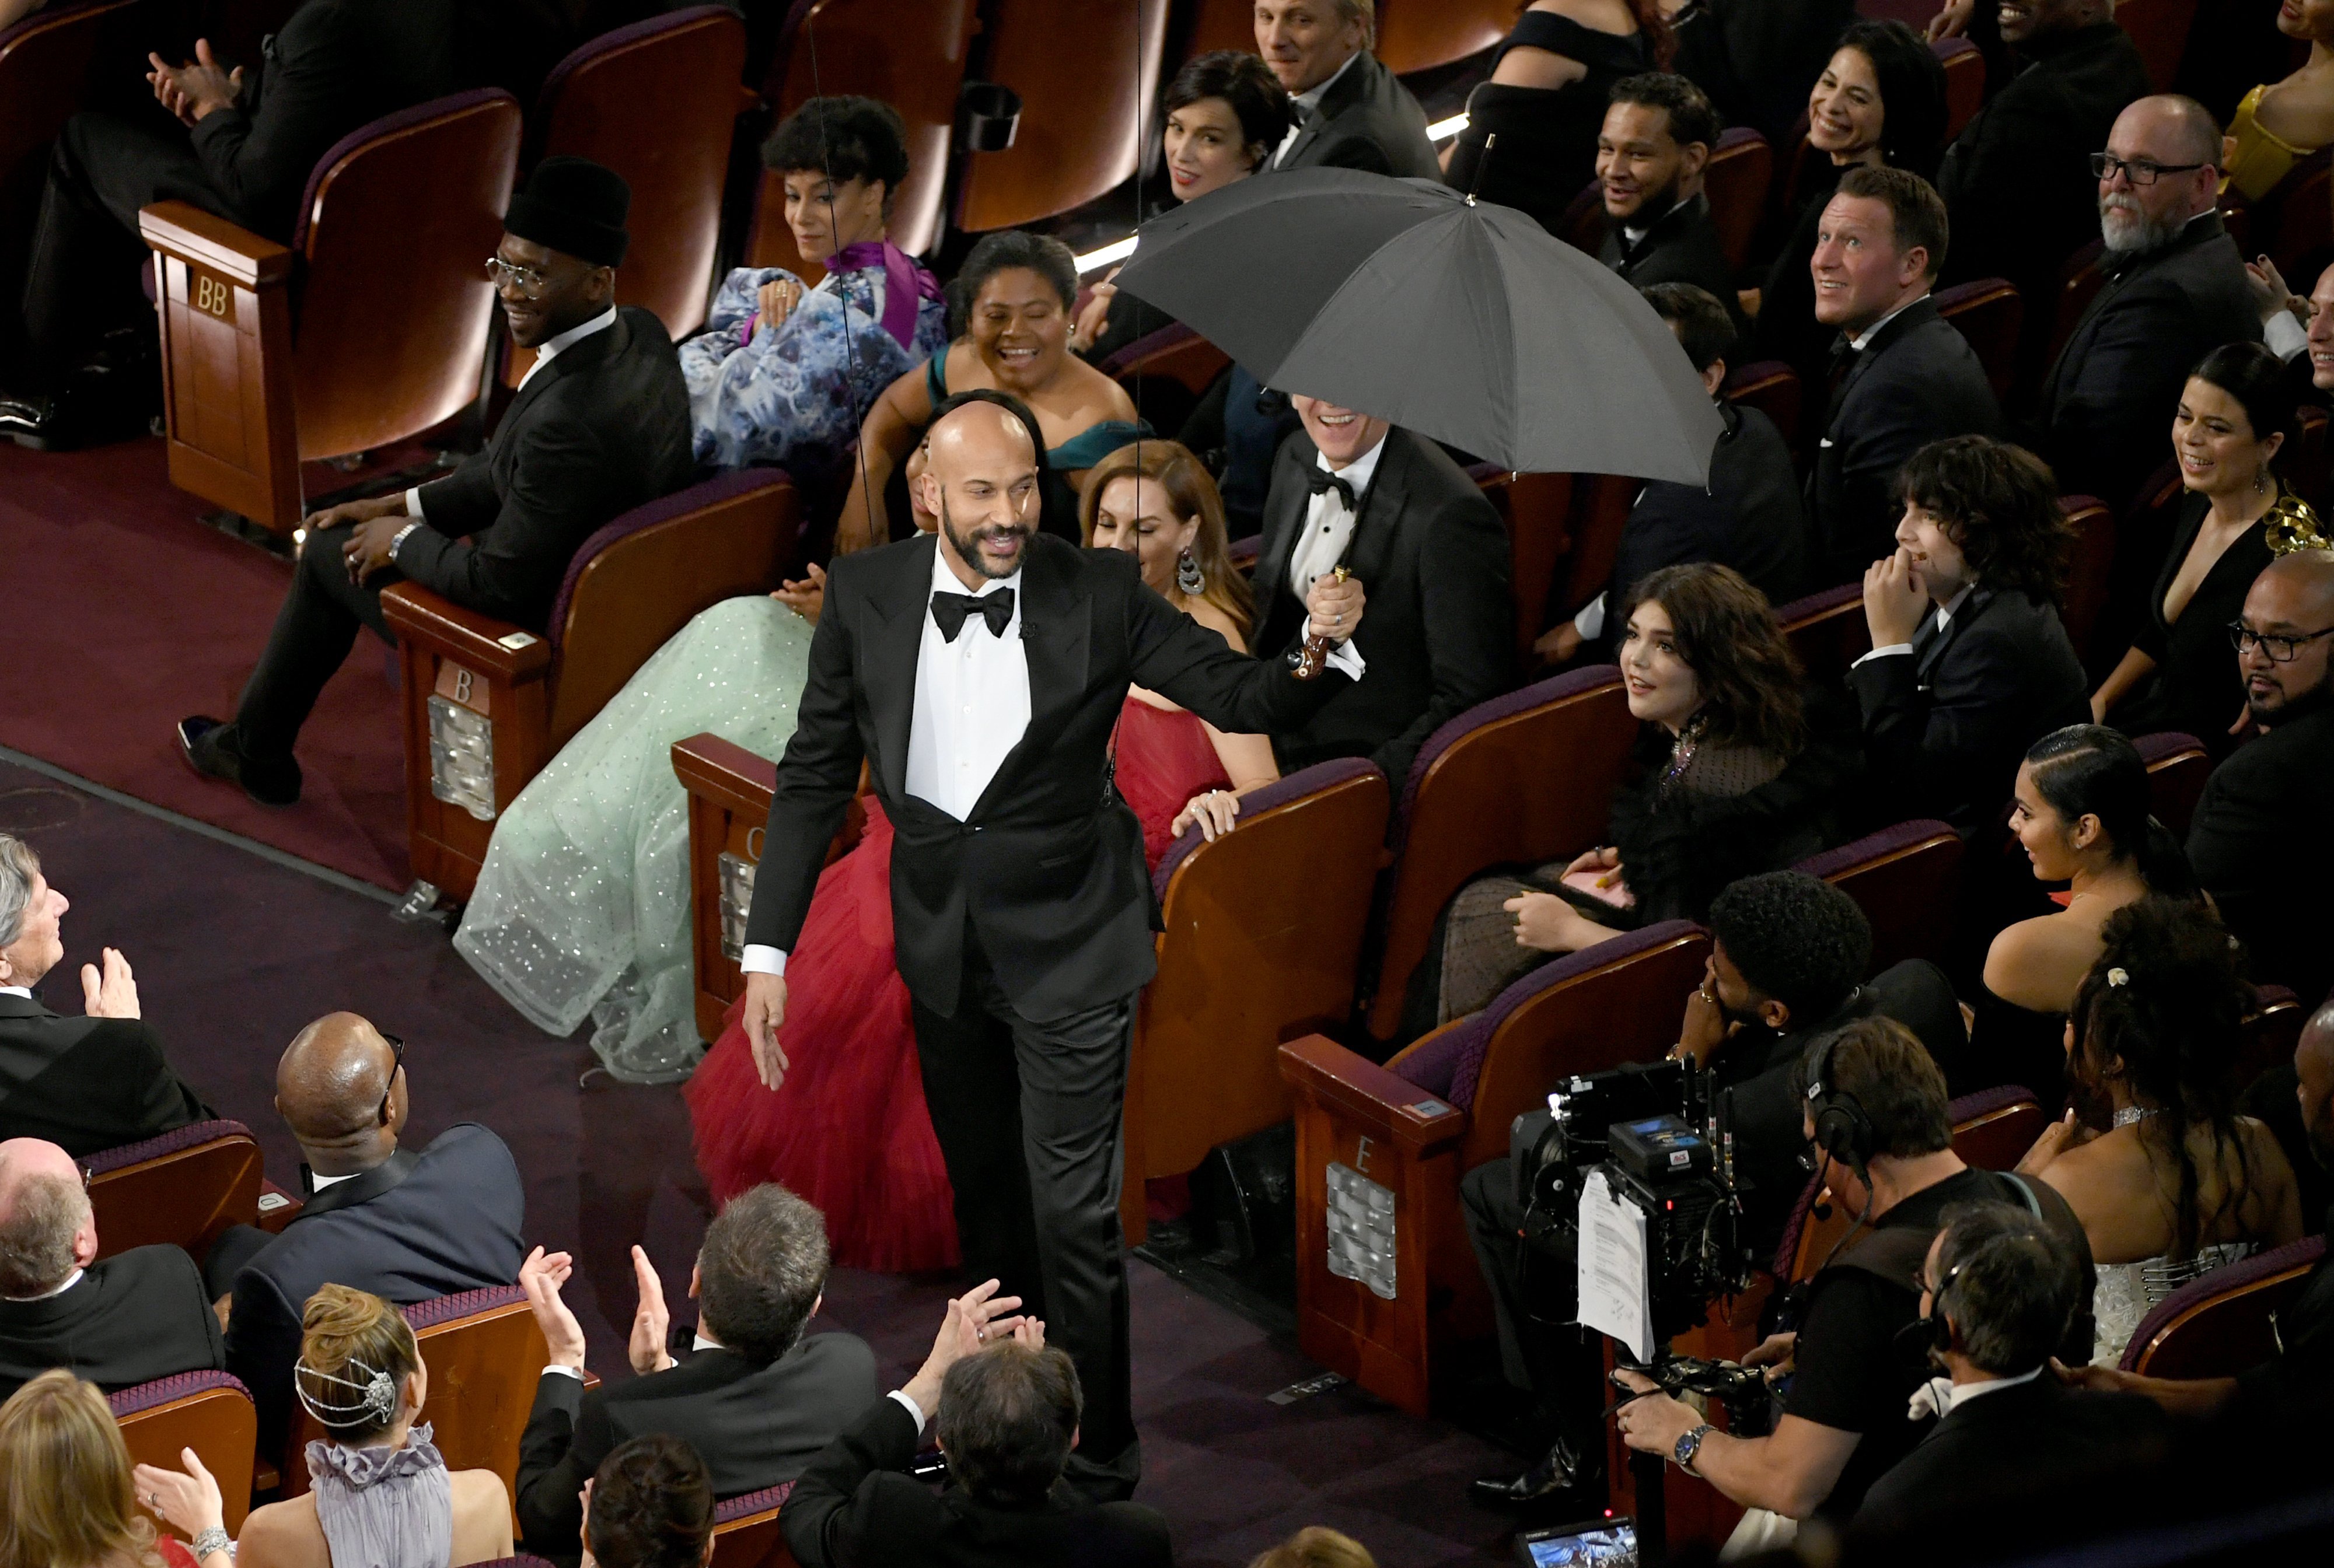 Keegan-Michael Key holding the umbrella at the 91st Annual Academy Awards | Photo: Getty Images